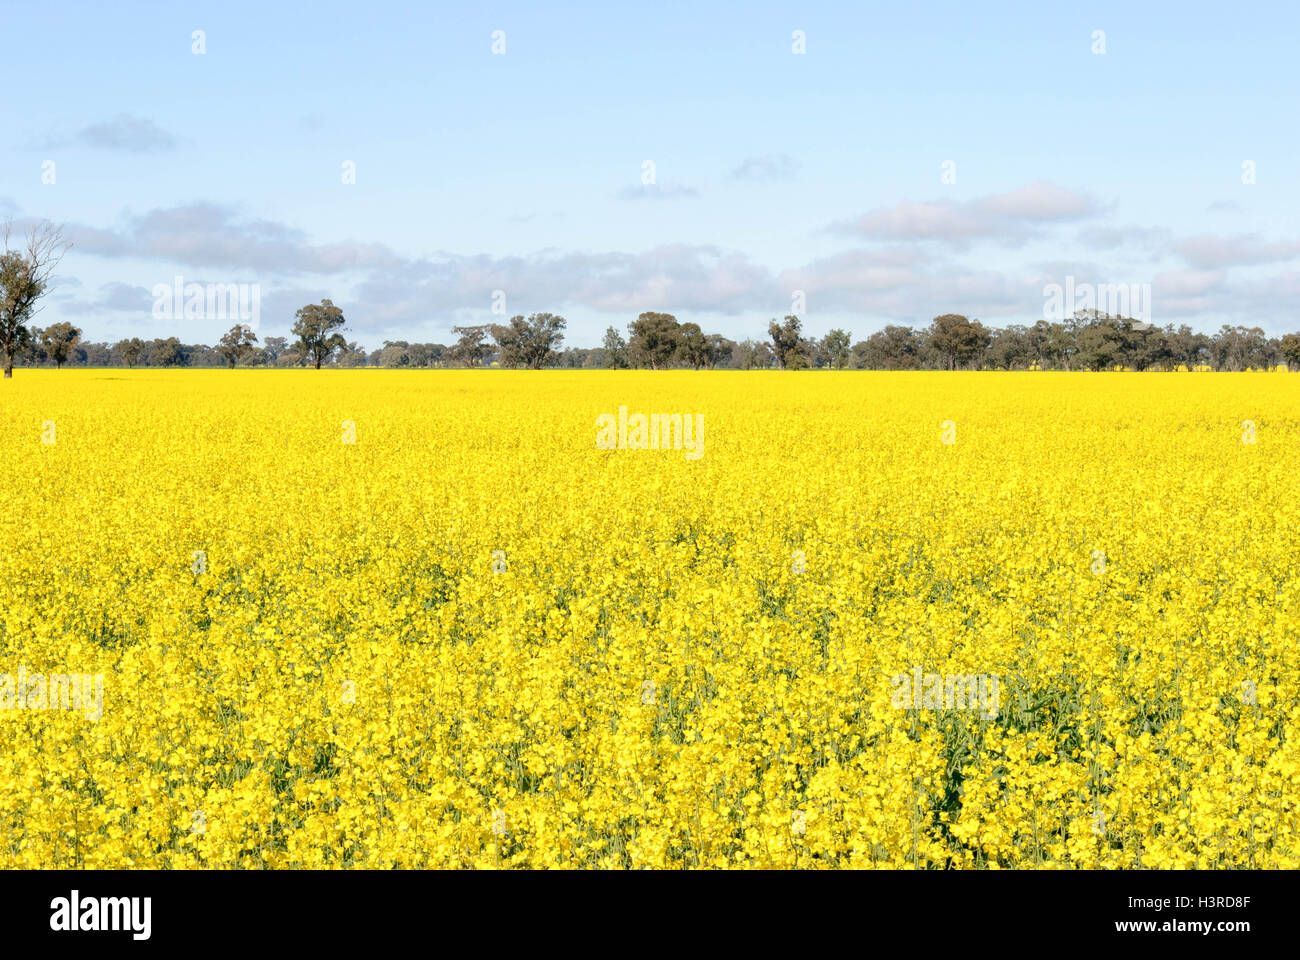 a flowering canola crop with trees in background and clouds in sky Stock Photo